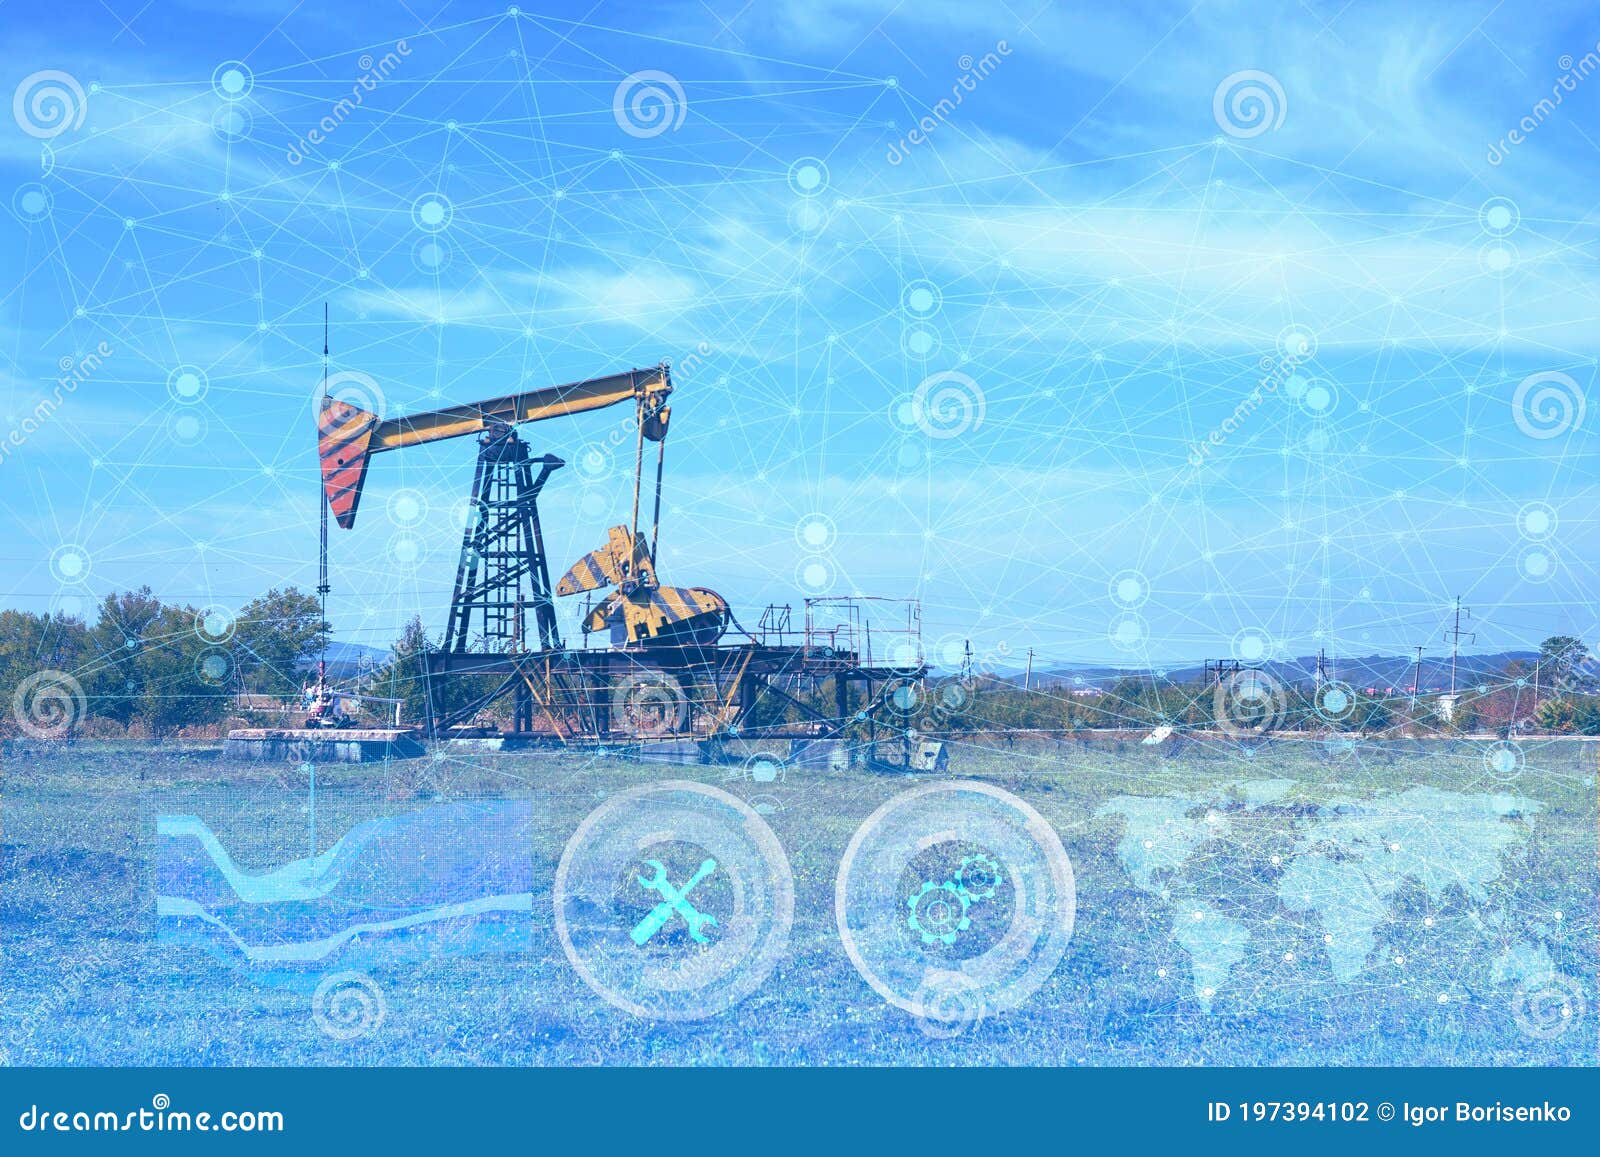 the concept of oil production in the field using artificial intelligence, analysis of the obtained data on the flow rate, mtbf and